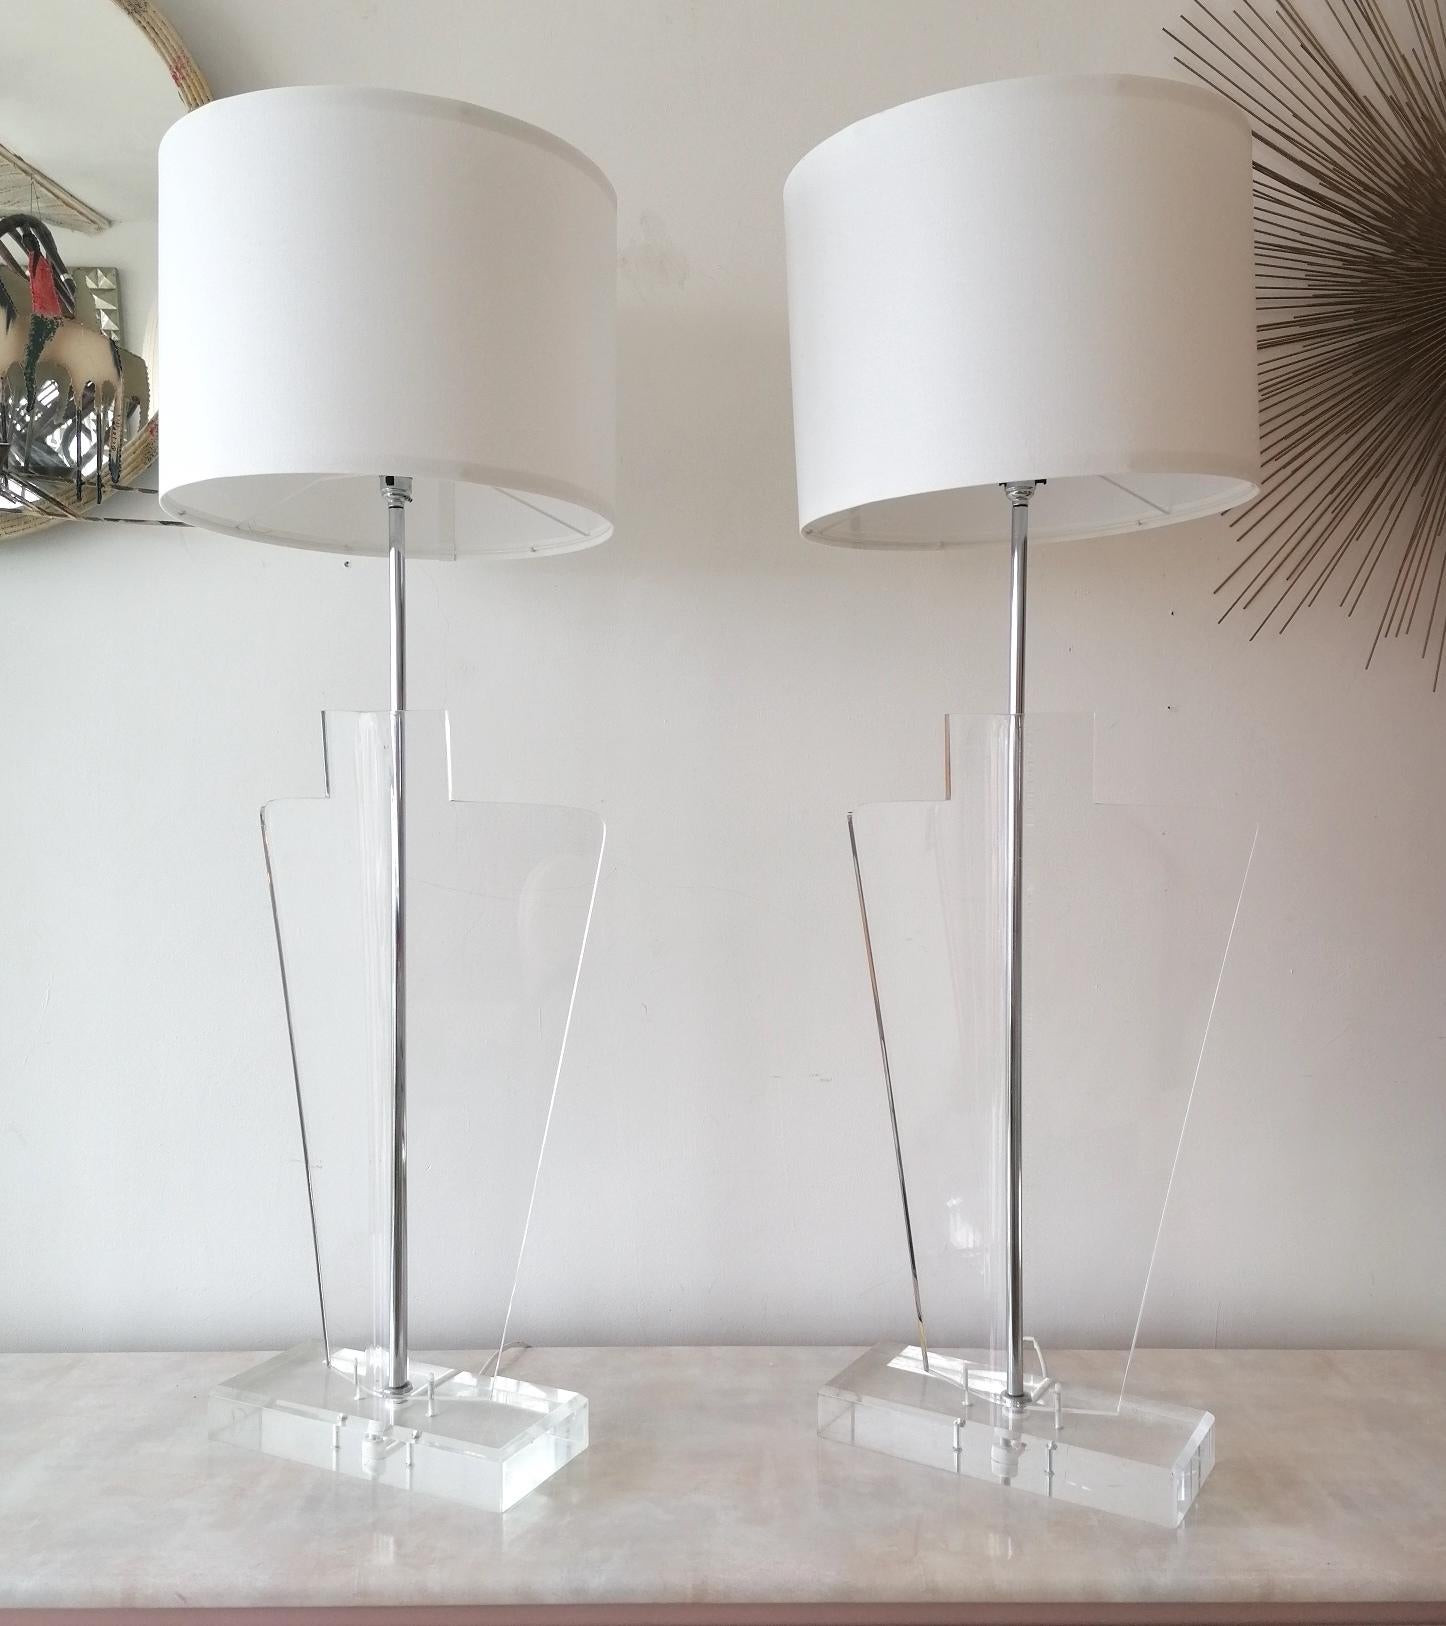 Pair of strikingly large Art Deco Revival lucite & chrome lamps, 1970s Italian. No makers label remaining, so the designer is unknown, as yet.
Newly rewired.

Dimensions : height to top of bulb holder 96cm, width of lucite body 43cm, height to